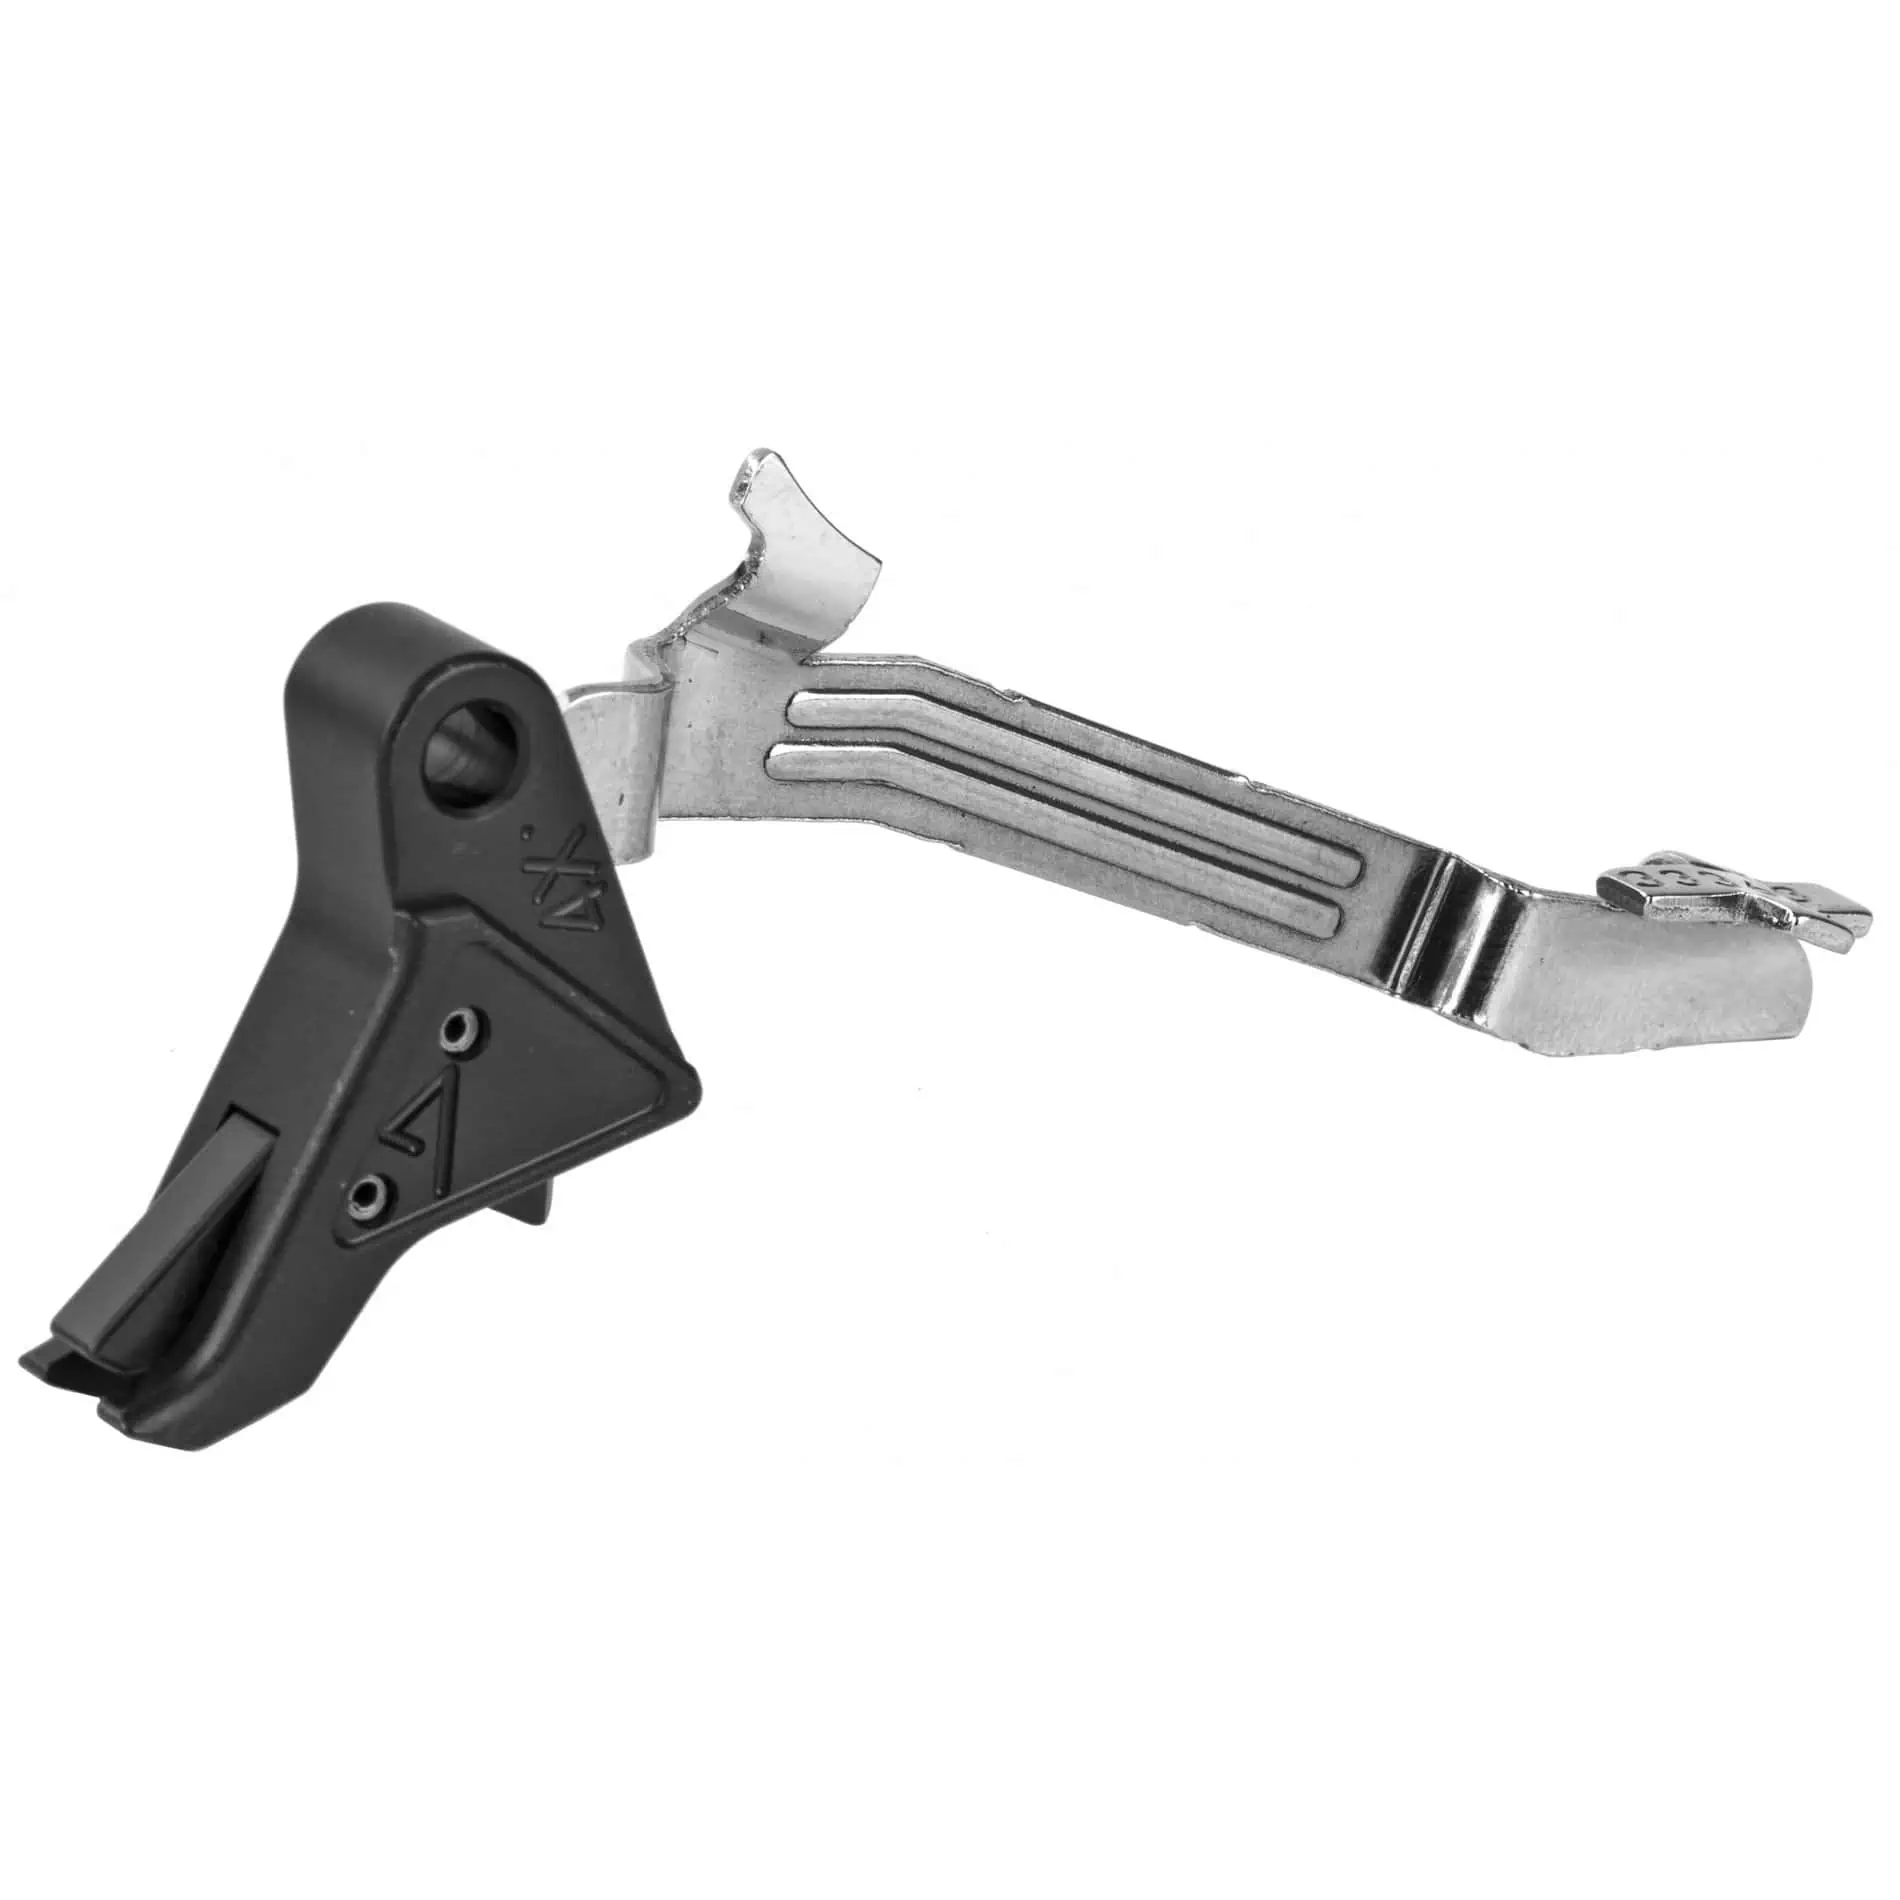 Open Box Return-Agency Arms Drop-In Flat Trigger for Glock 43/43X/48